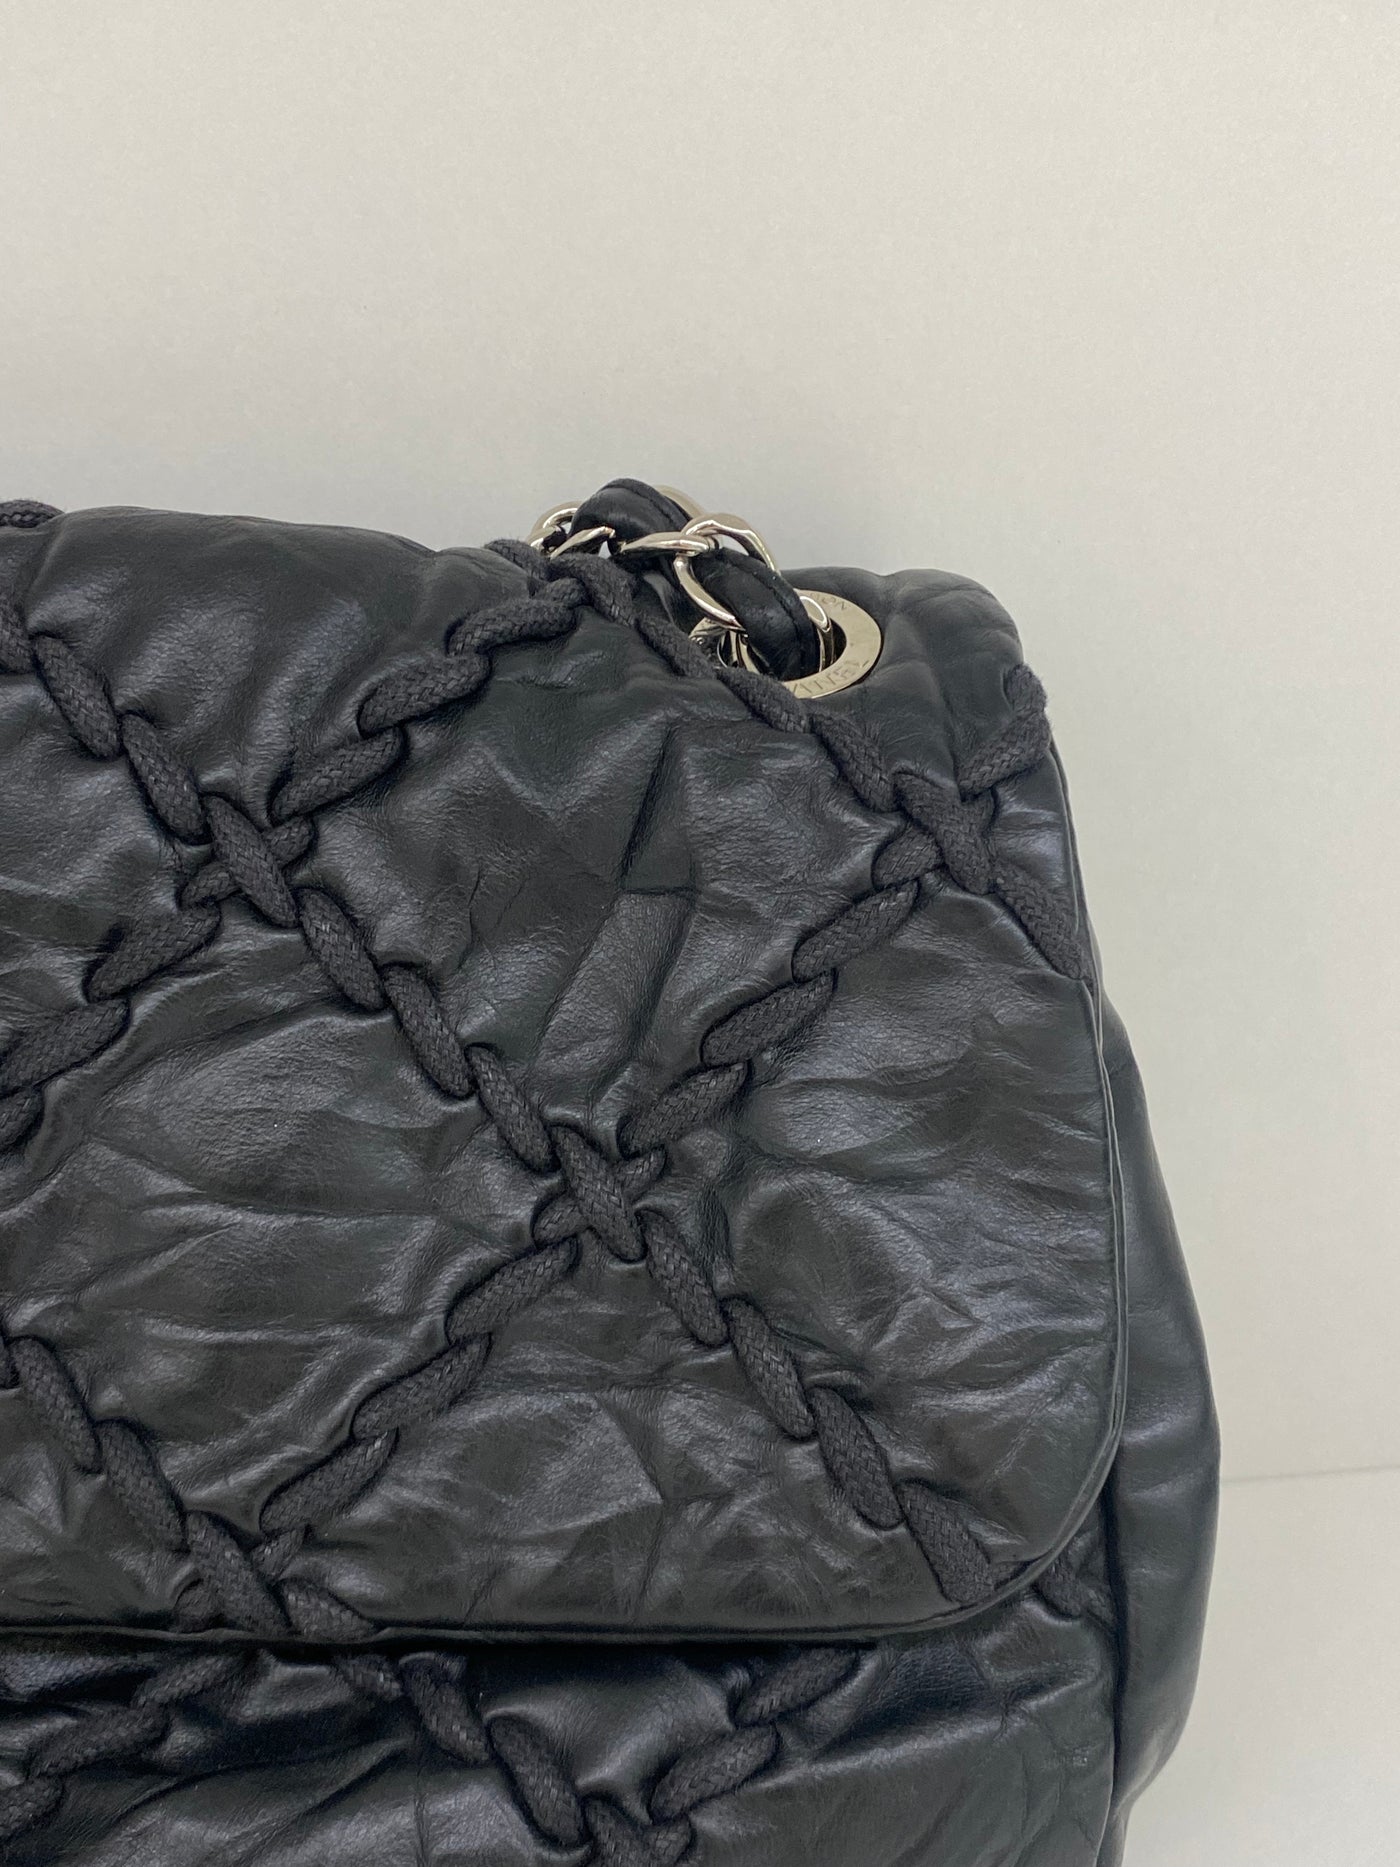 Chanel Large Quilted Detail Black Flap Bag